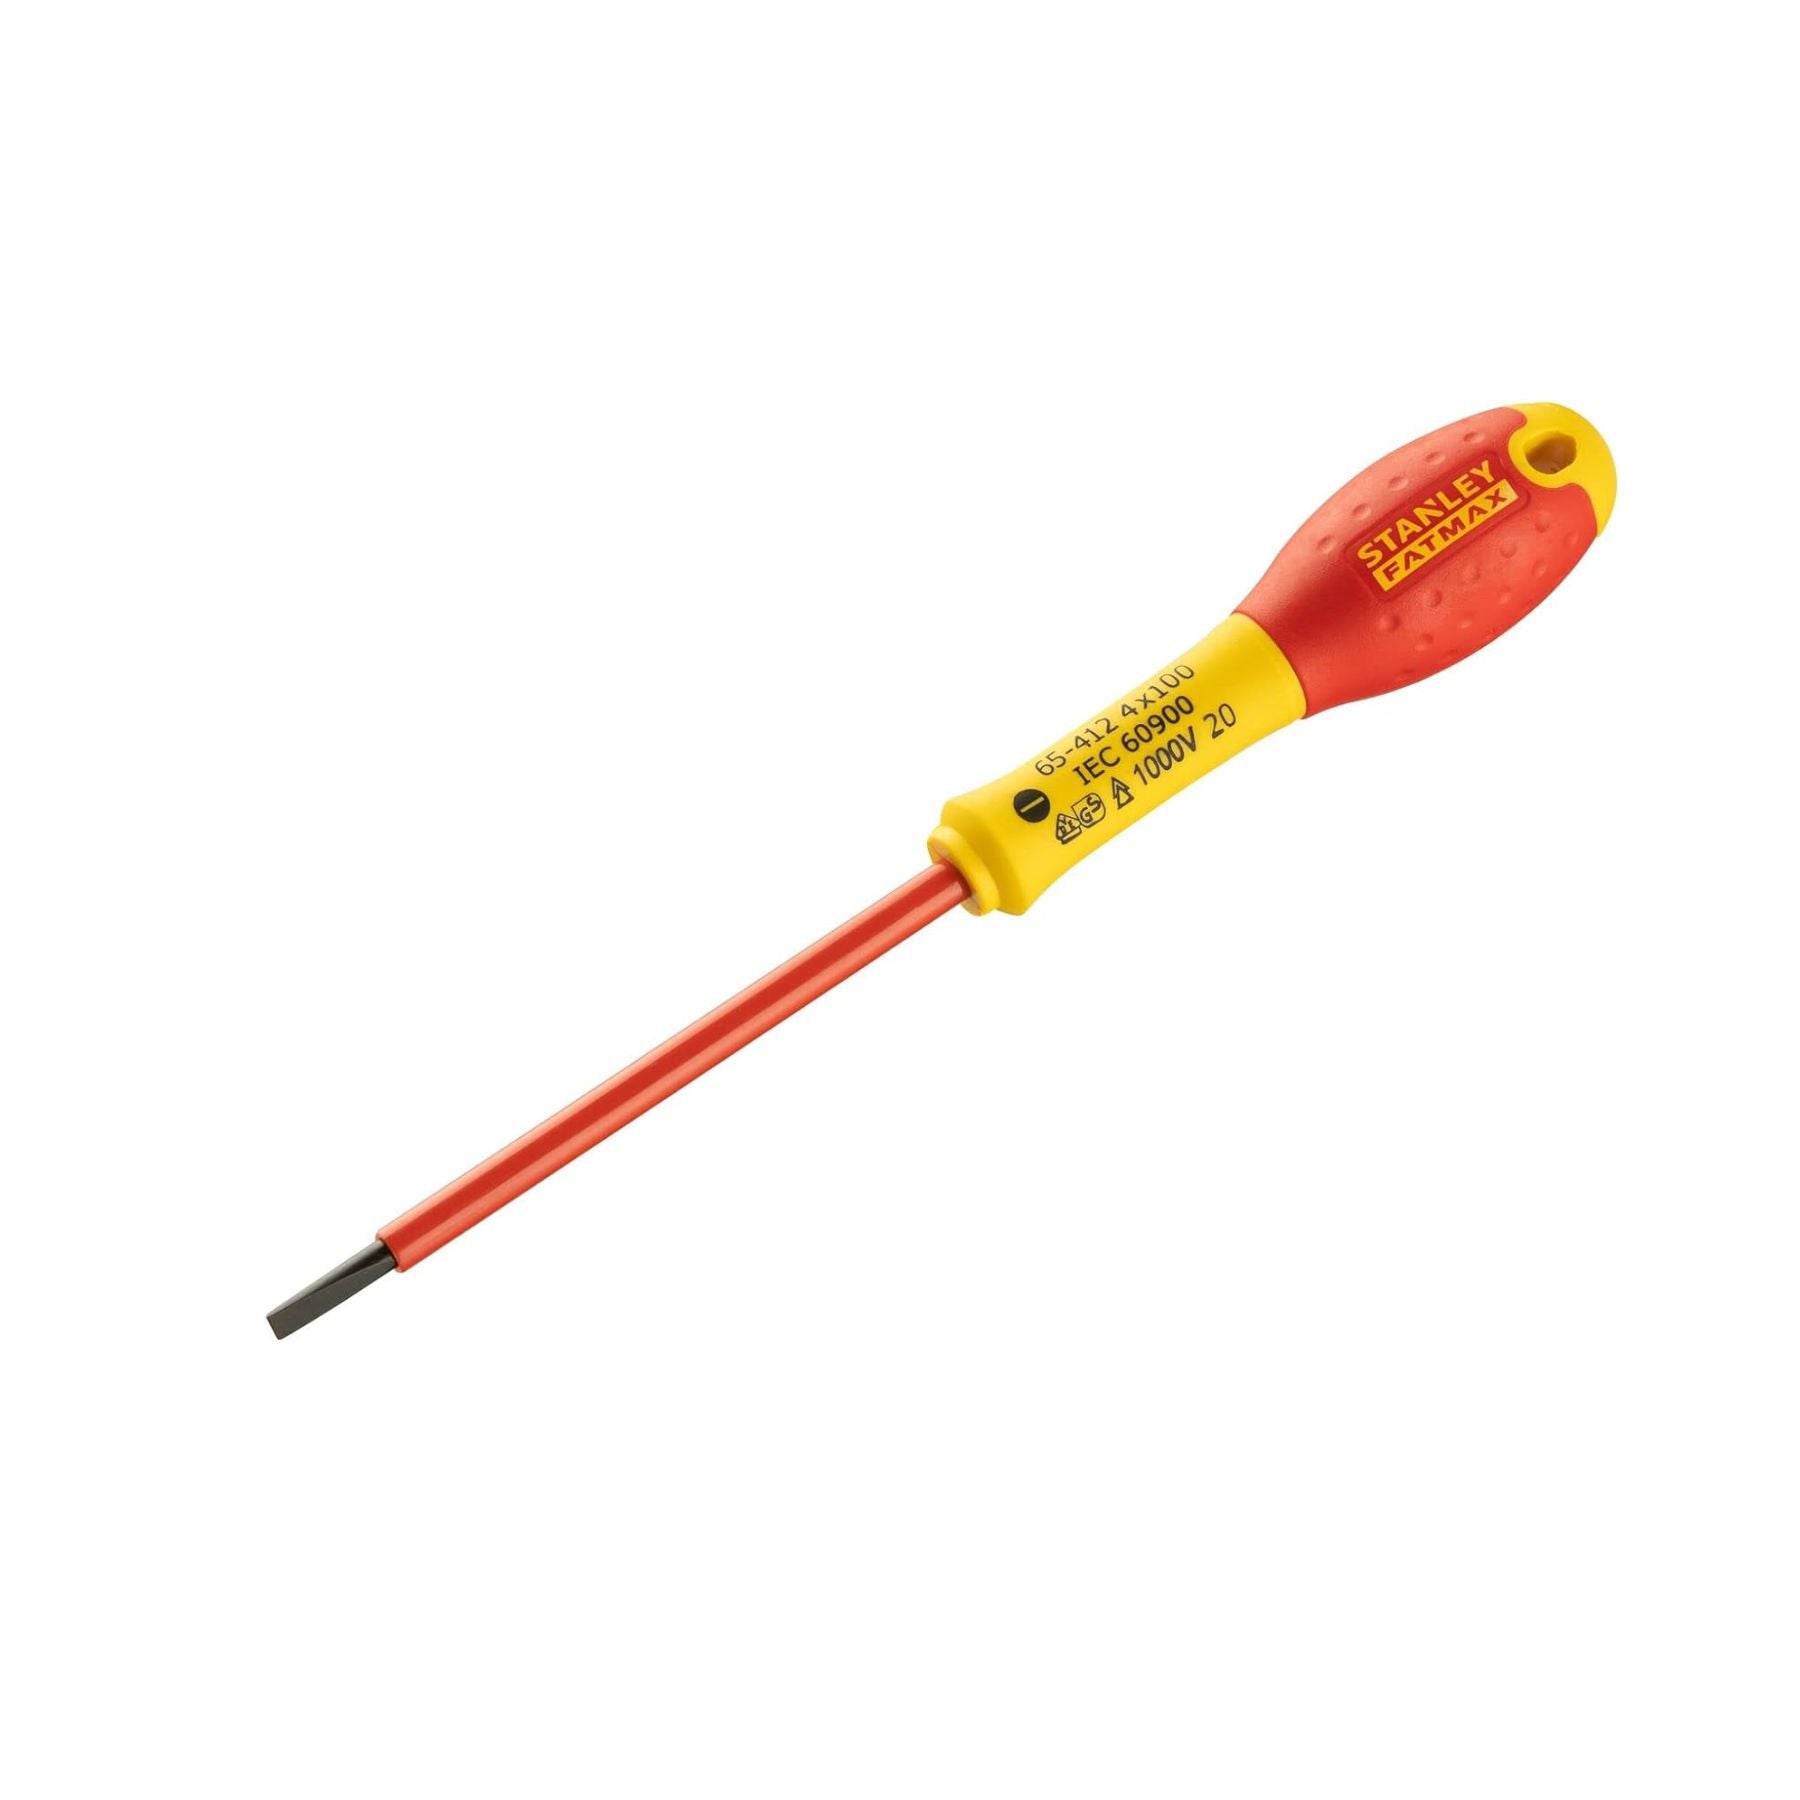 Stanley 0-65-412 VDE Screwdrivers Red/ Yellow